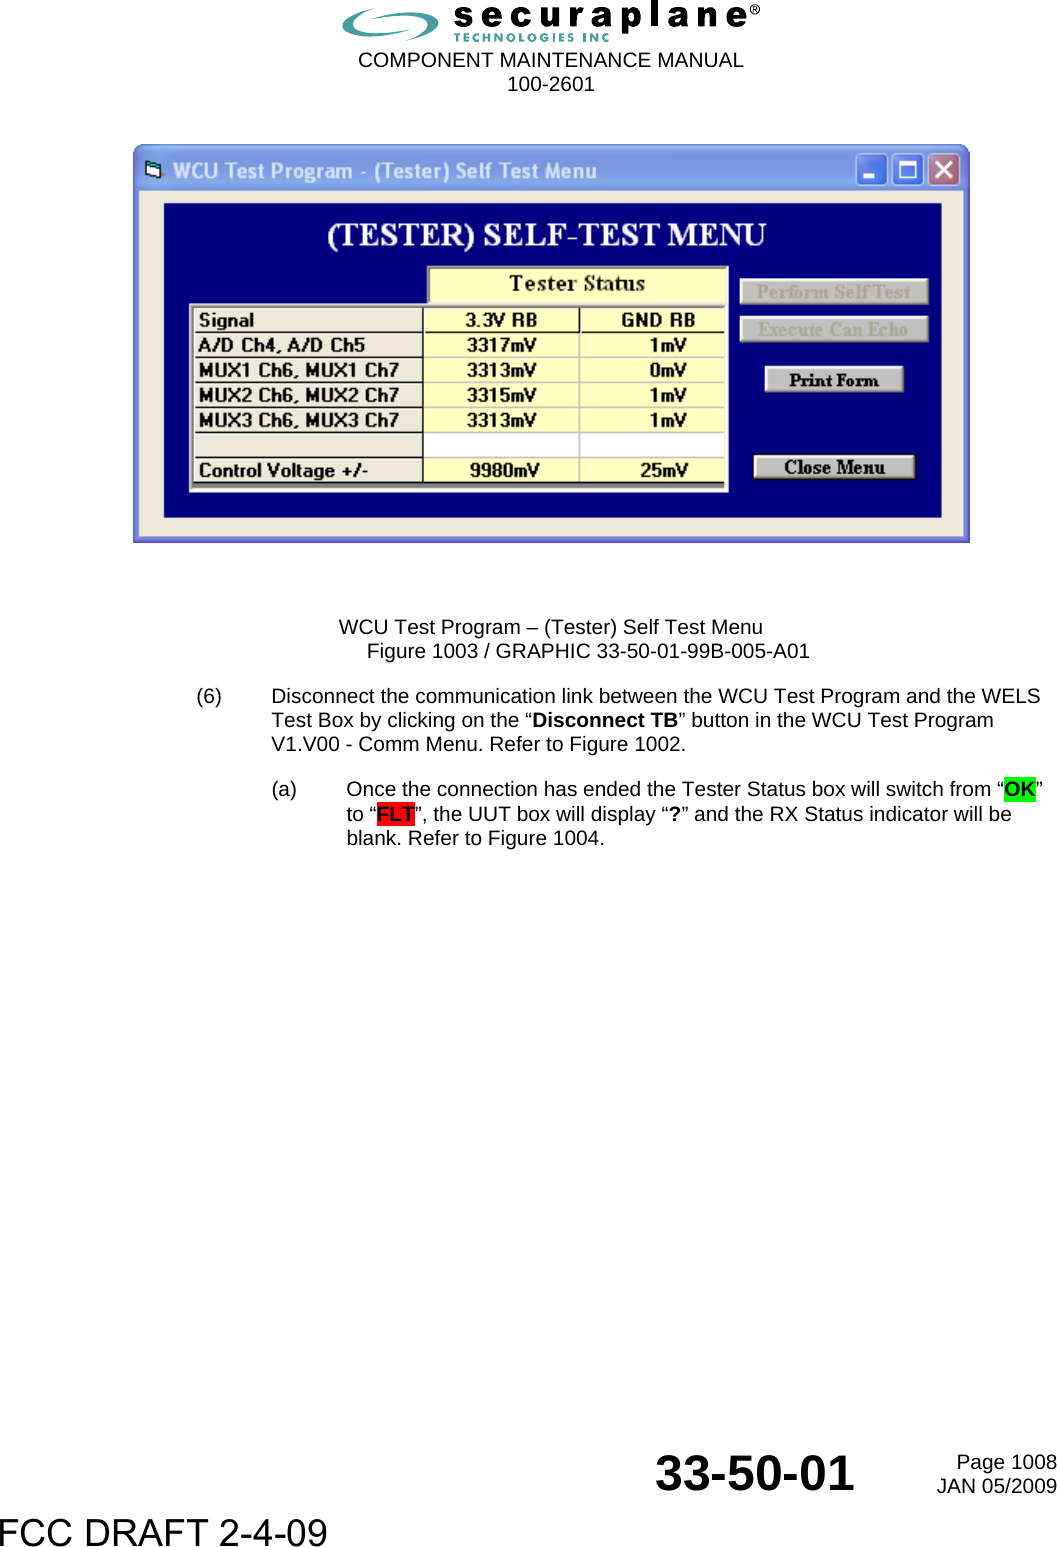  COMPONENT MAINTENANCE MANUAL  100-2601  33-50-01  Page 1008JAN 05/2009      WCU Test Program – (Tester) Self Test Menu Figure 1003 / GRAPHIC 33-50-01-99B-005-A01 (6)  Disconnect the communication link between the WCU Test Program and the WELS Test Box by clicking on the “Disconnect TB” button in the WCU Test Program V1.V00 - Comm Menu. Refer to Figure 1002. (a)  Once the connection has ended the Tester Status box will switch from “OK” to “FLT”, the UUT box will display “?” and the RX Status indicator will be blank. Refer to Figure 1004. FCC DRAFT 2-4-09